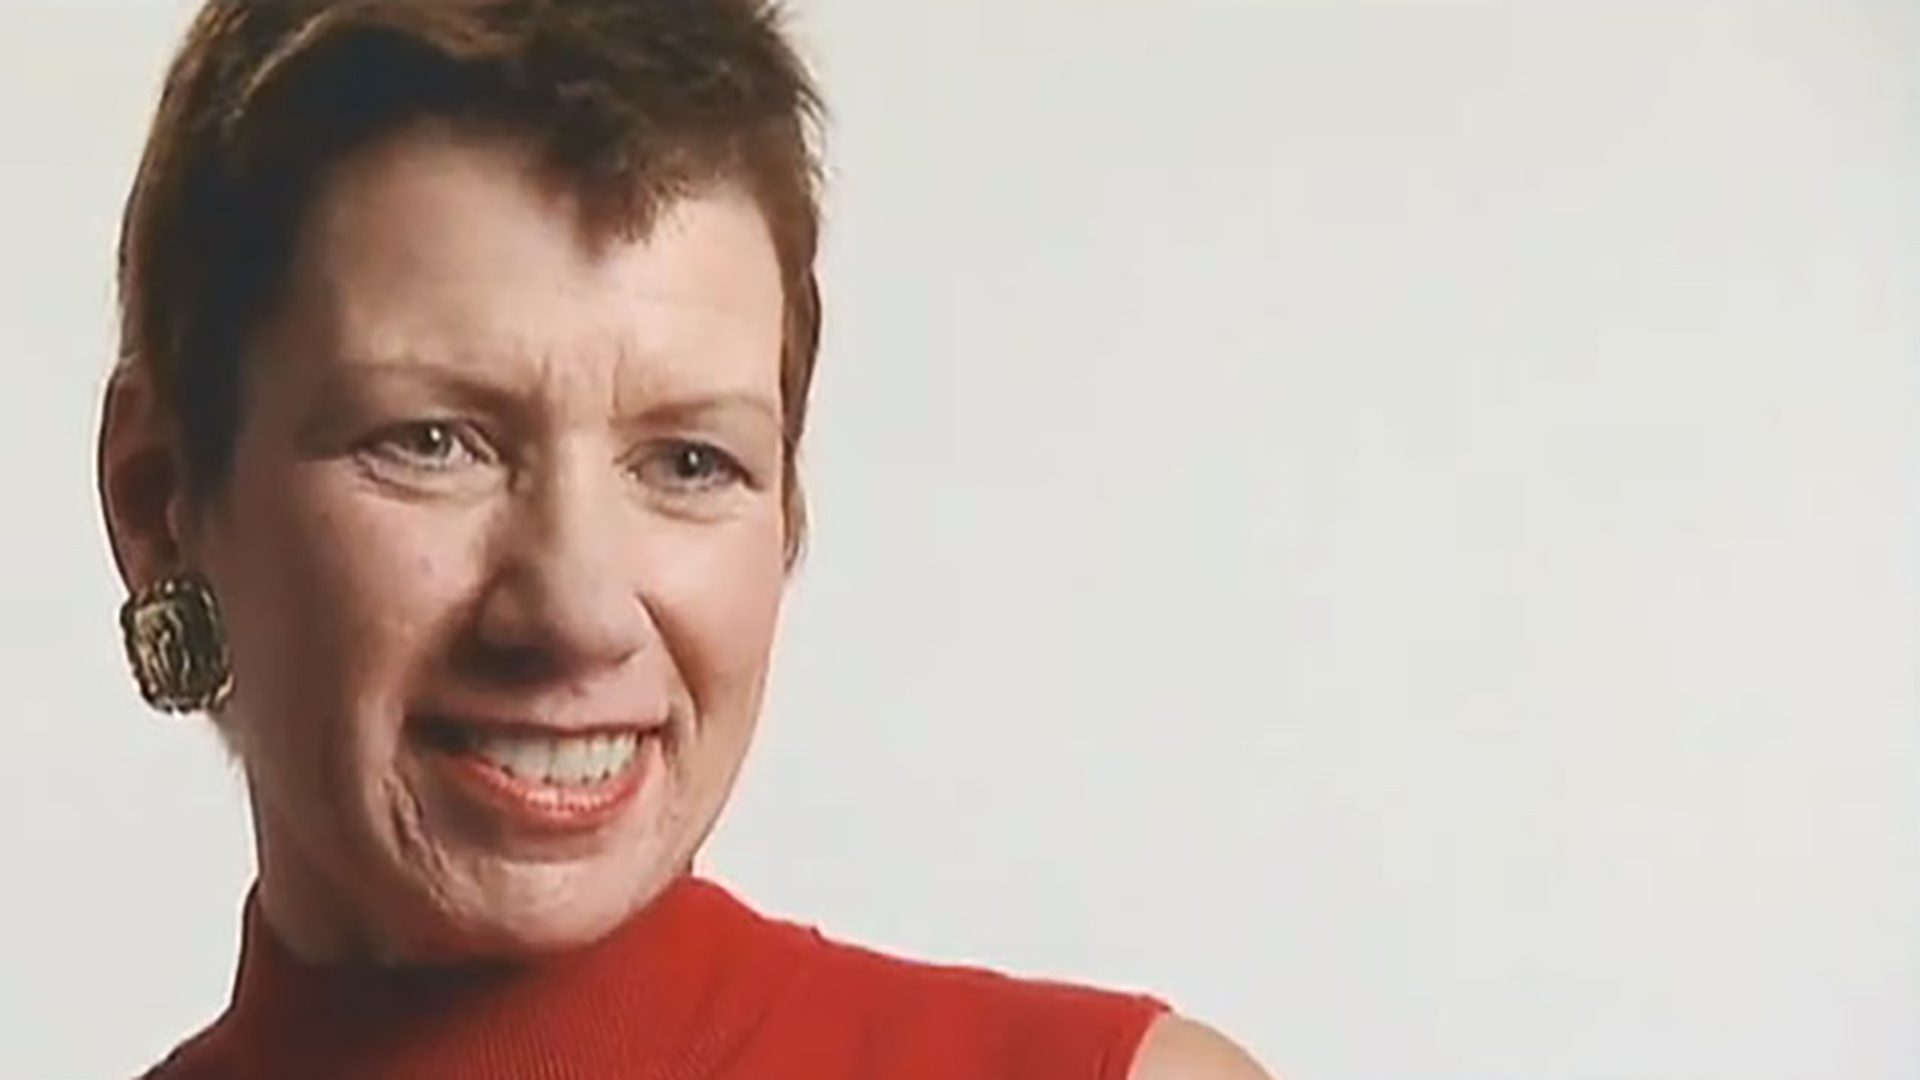 A portrait of an adult woman with short hair and a red sleeveless shirt